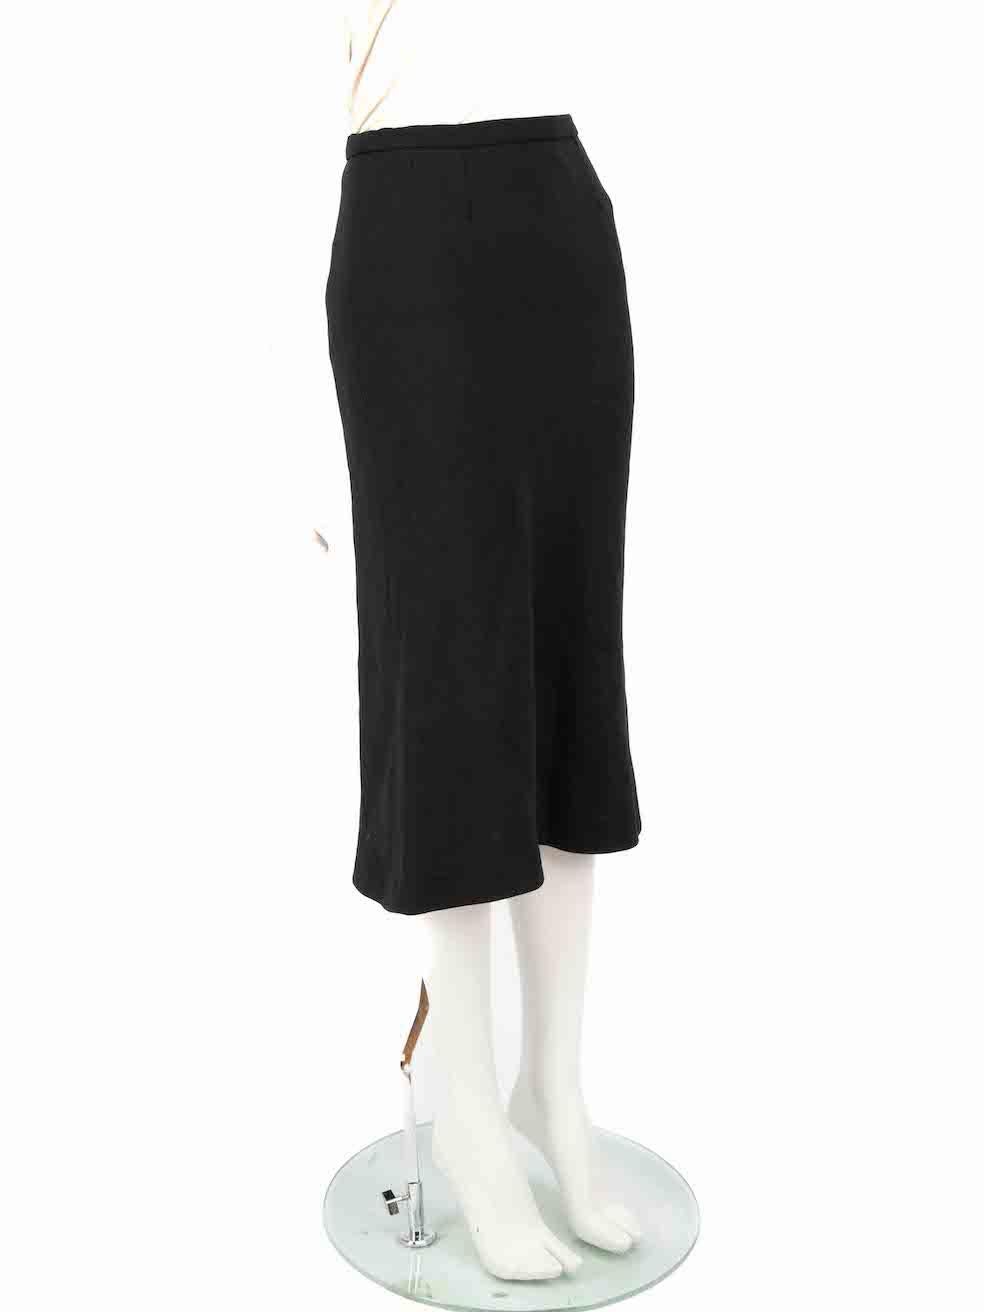 CONDITION is Very good. Minimal wear to the skirt is evident. Minimal mark near the front inner hemline and pull to thread near the rear hemline. The right clothing strap is cut off on this used Max Mara designer resale item.
 
 
 
 Details
 
 
